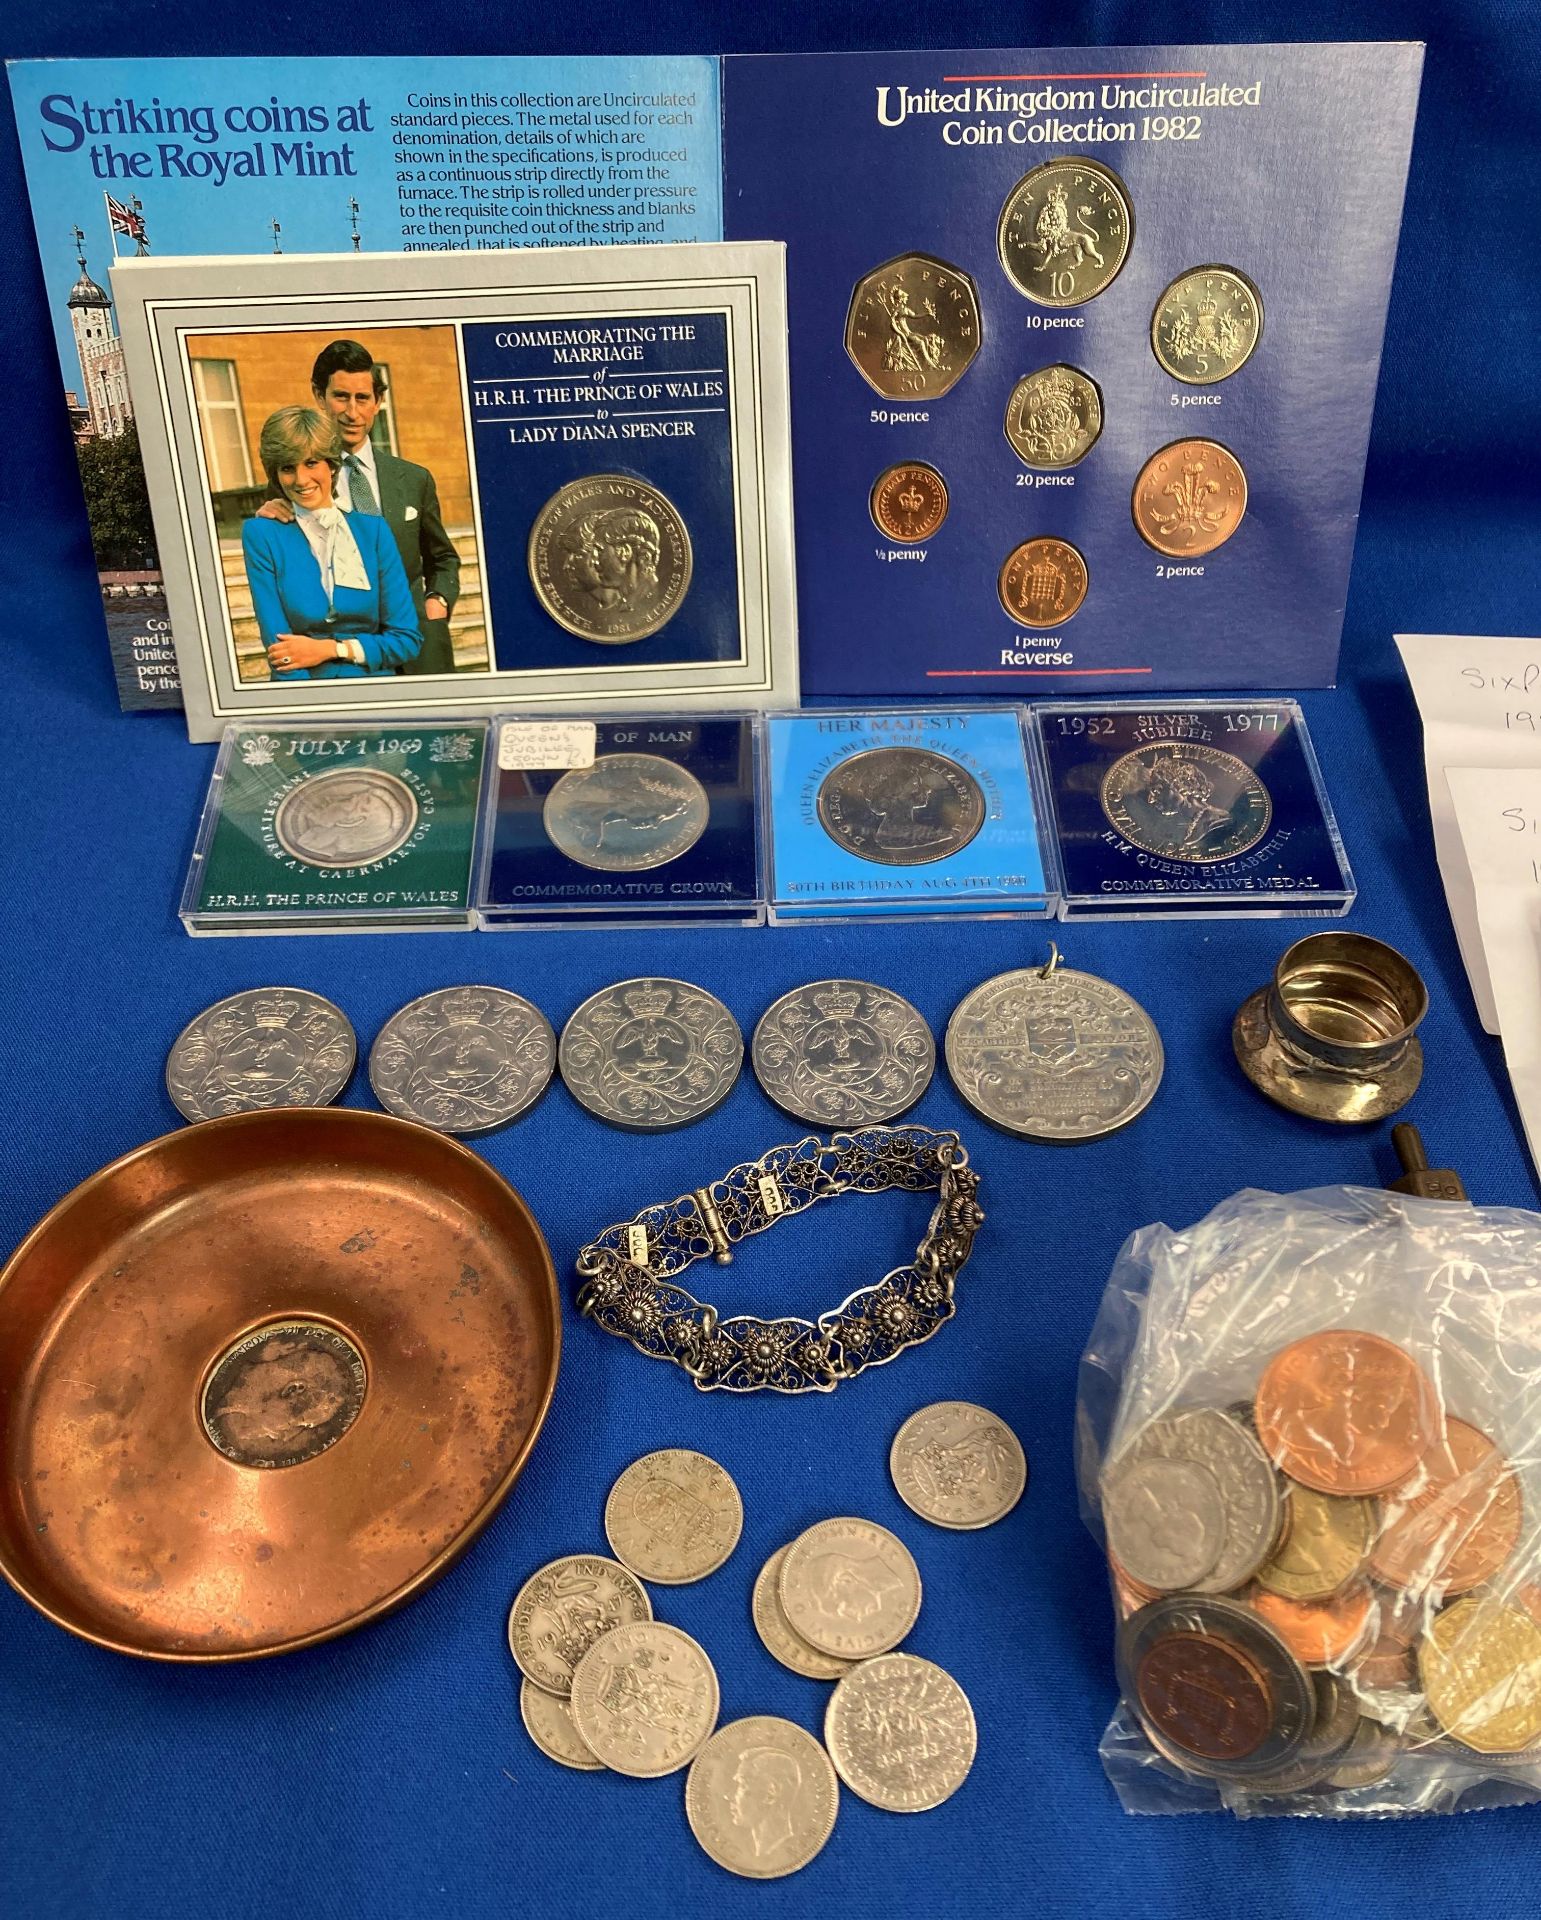 Contents to tray - assorted coins including Six Pence pieces, Shillings, Crowns, 1982 uncirculated, - Image 3 of 6